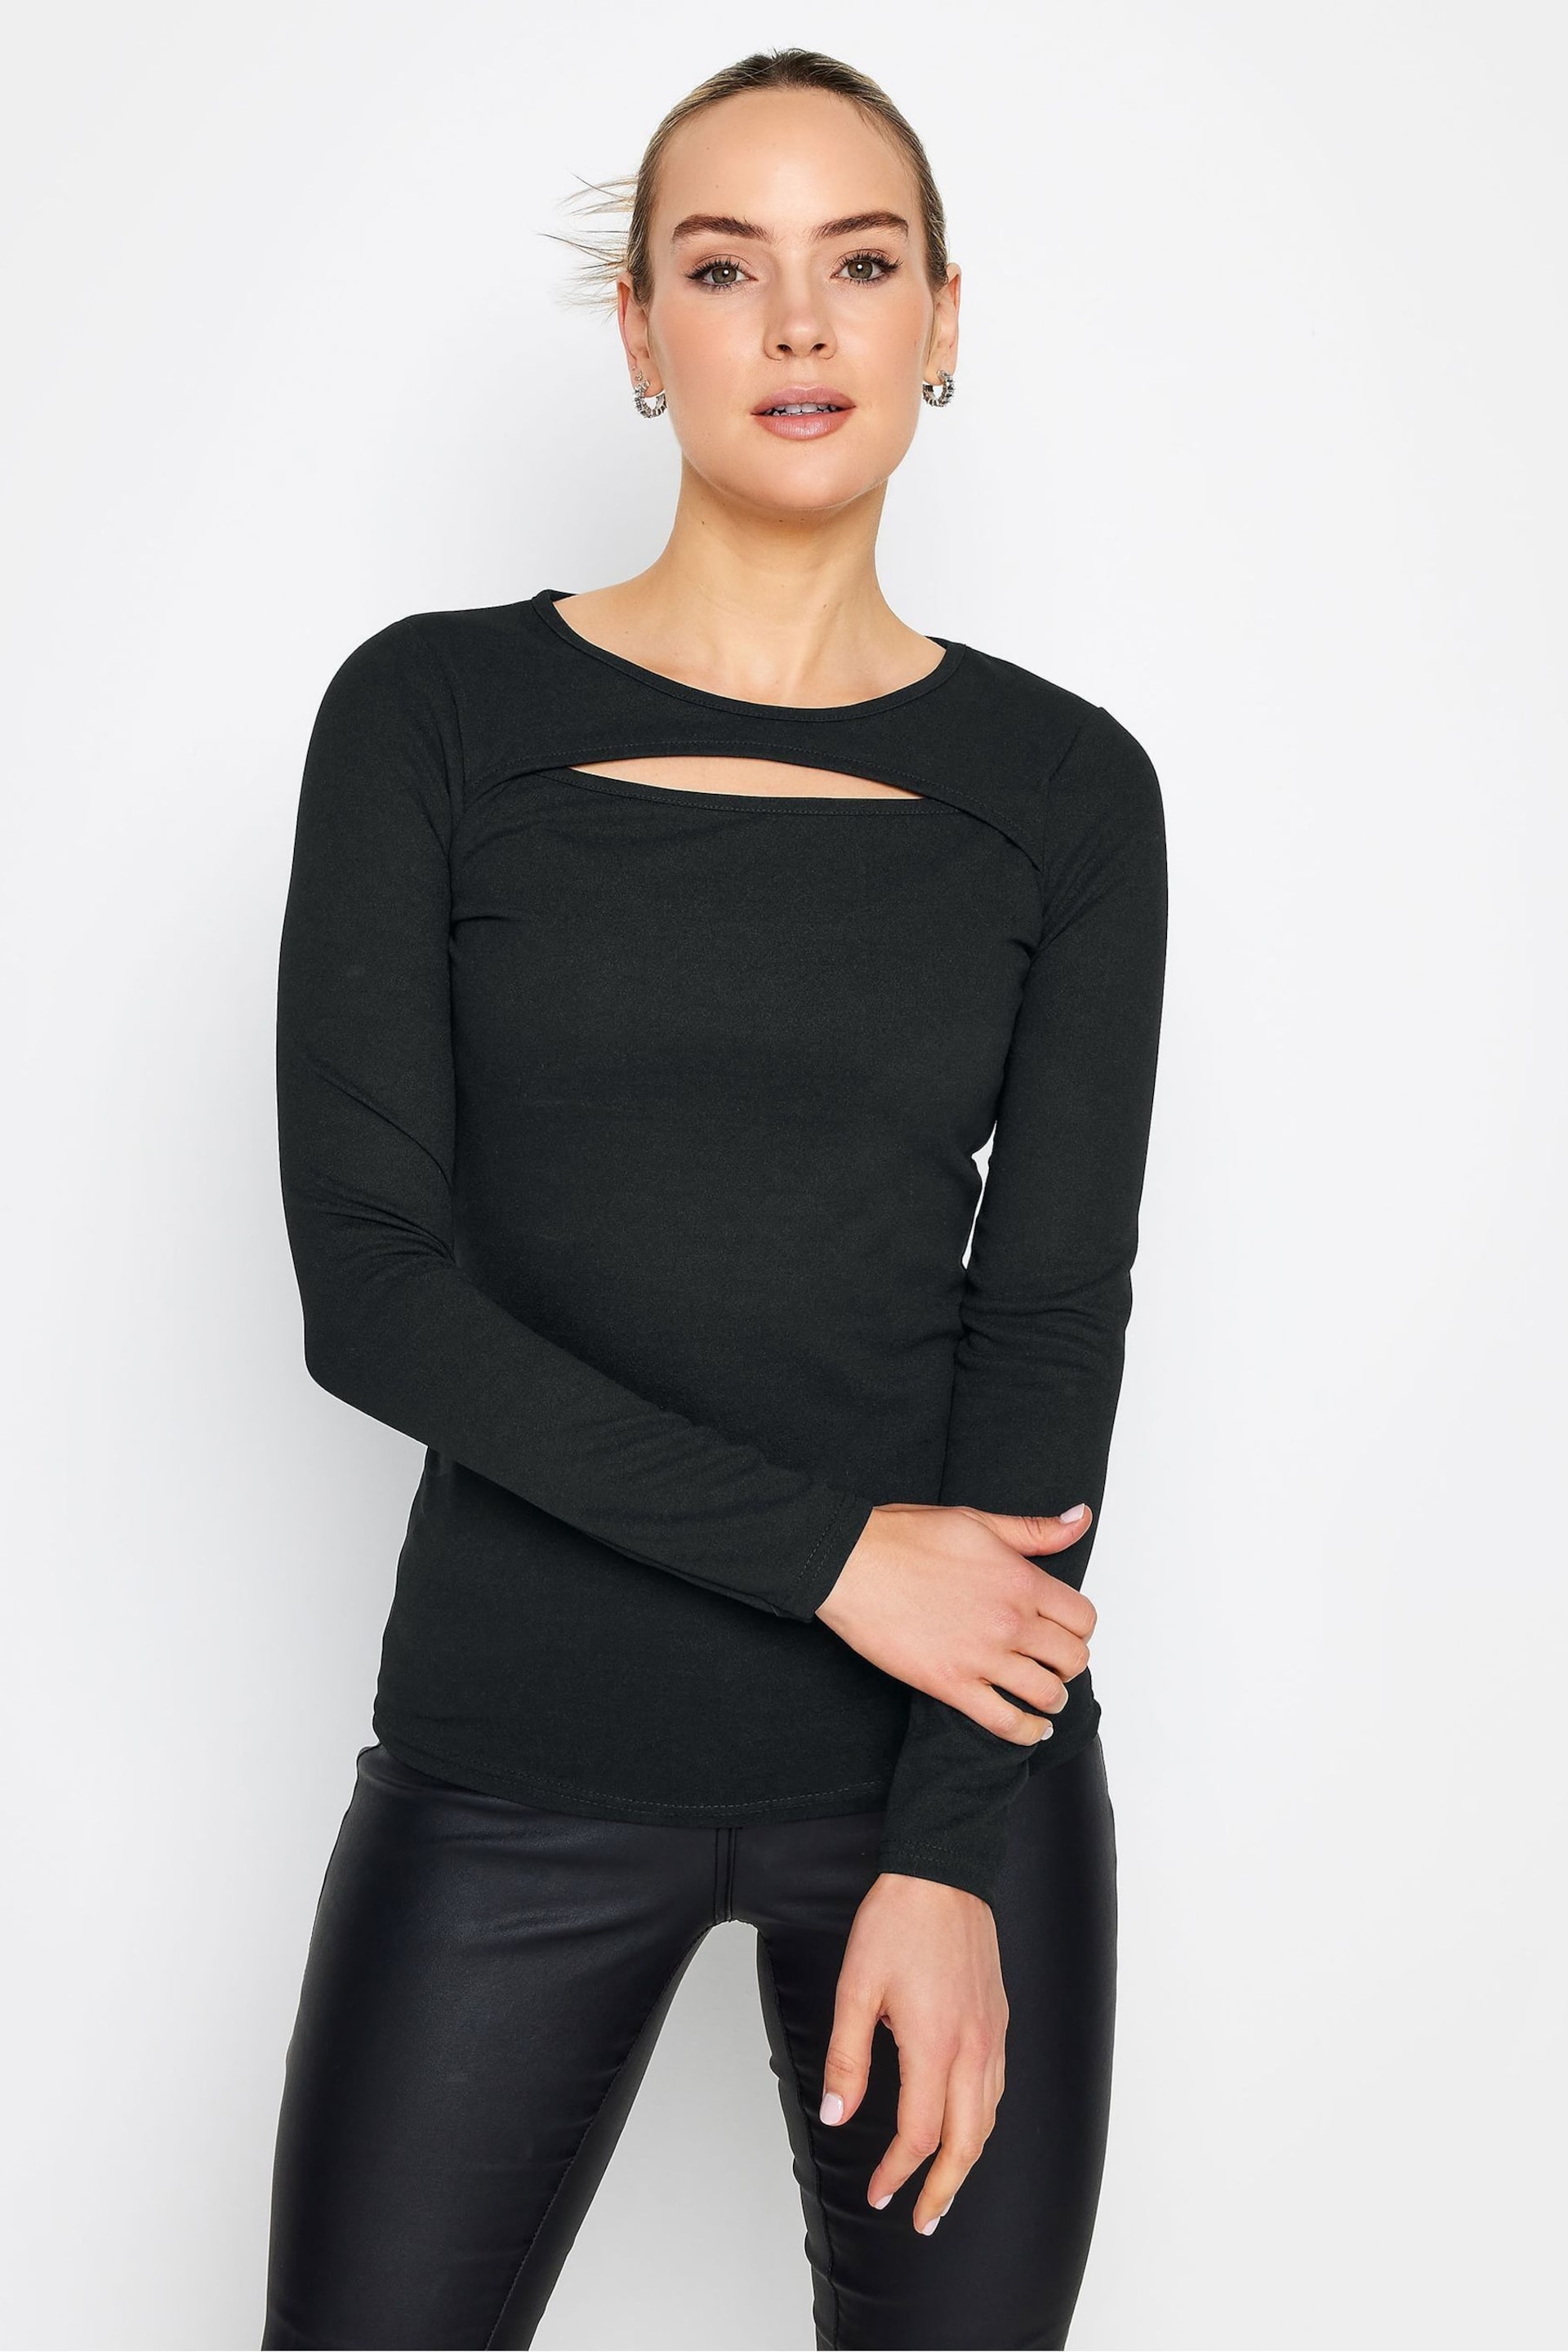 Long Tall Sally Black Cut Out Top - Image 1 of 4